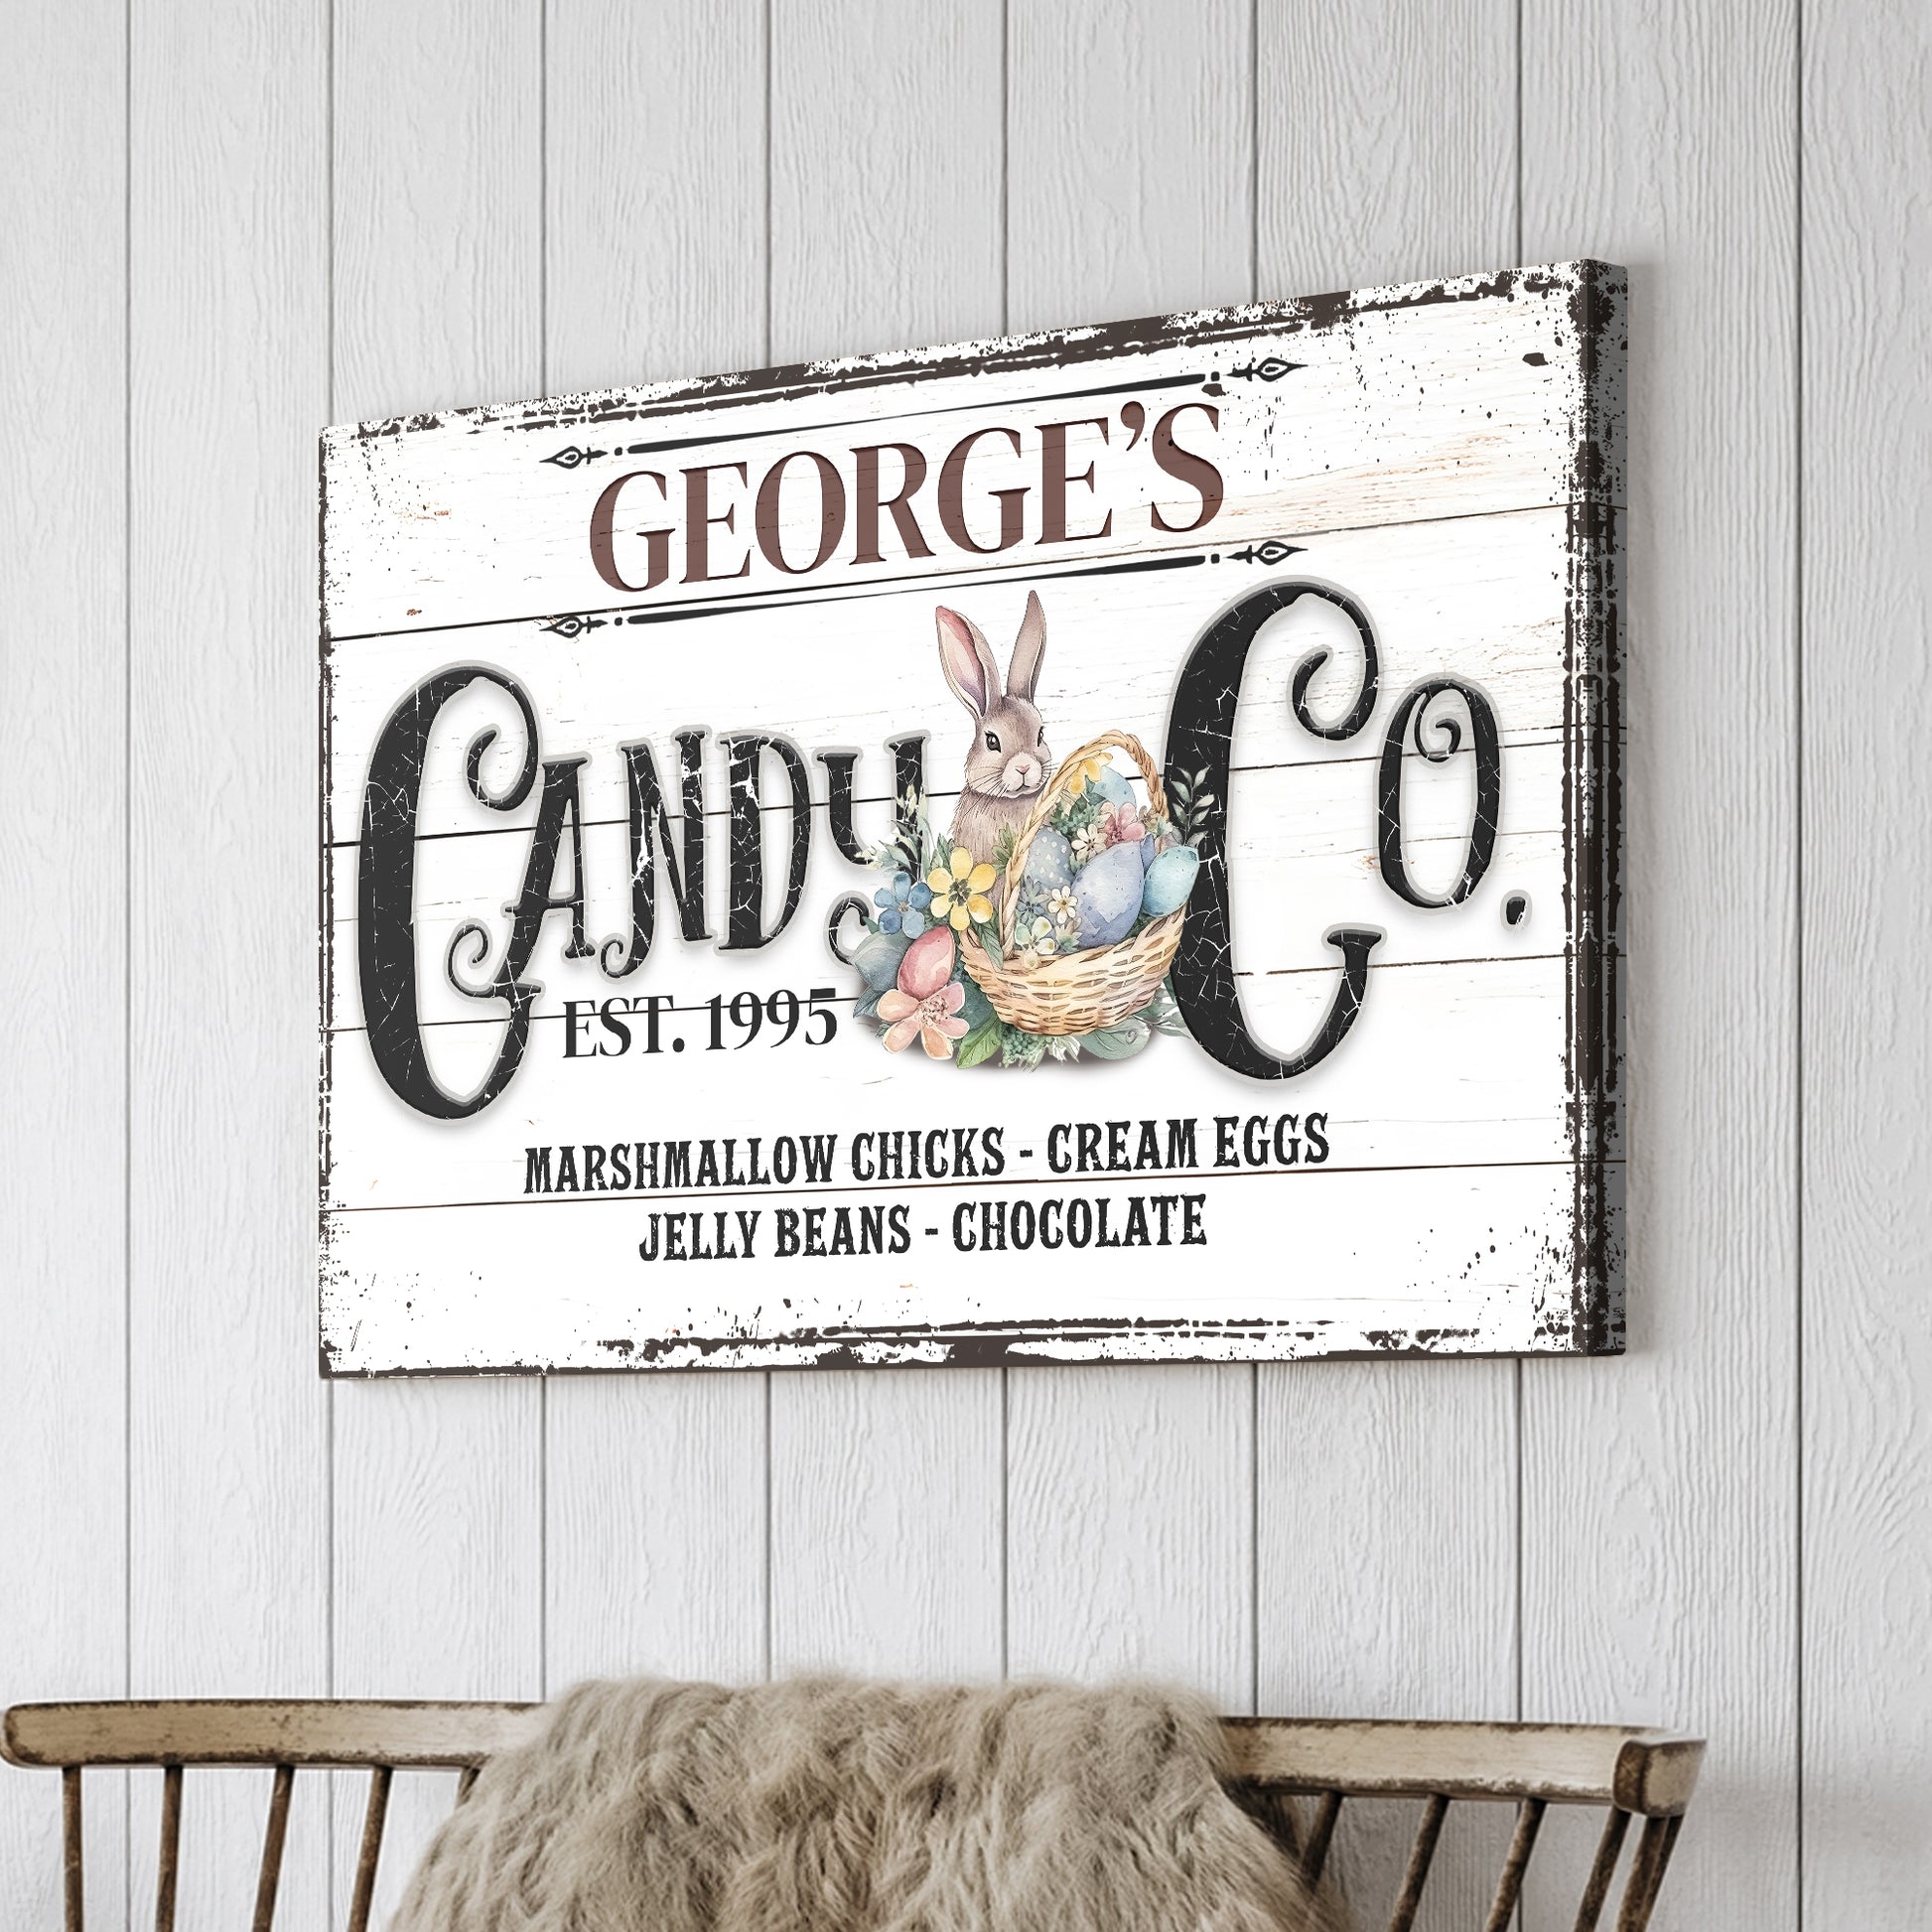 Honey Bunny Candy Company Sign II  - Image by Tailored Canvases